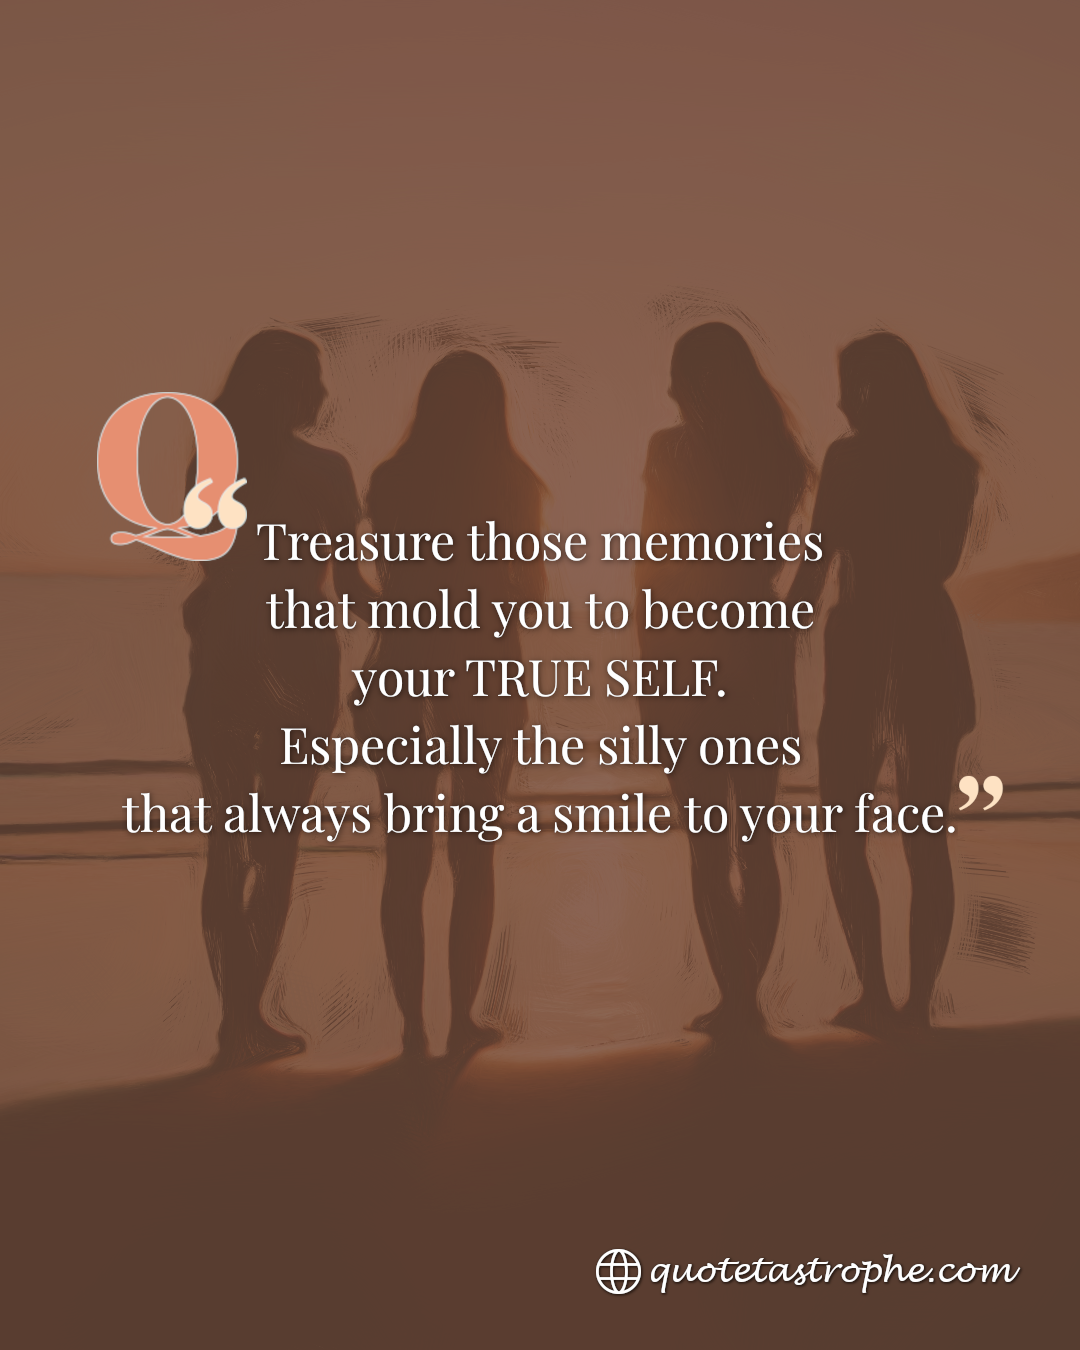 Treasure Those Memories That Mold You to be Your True Self